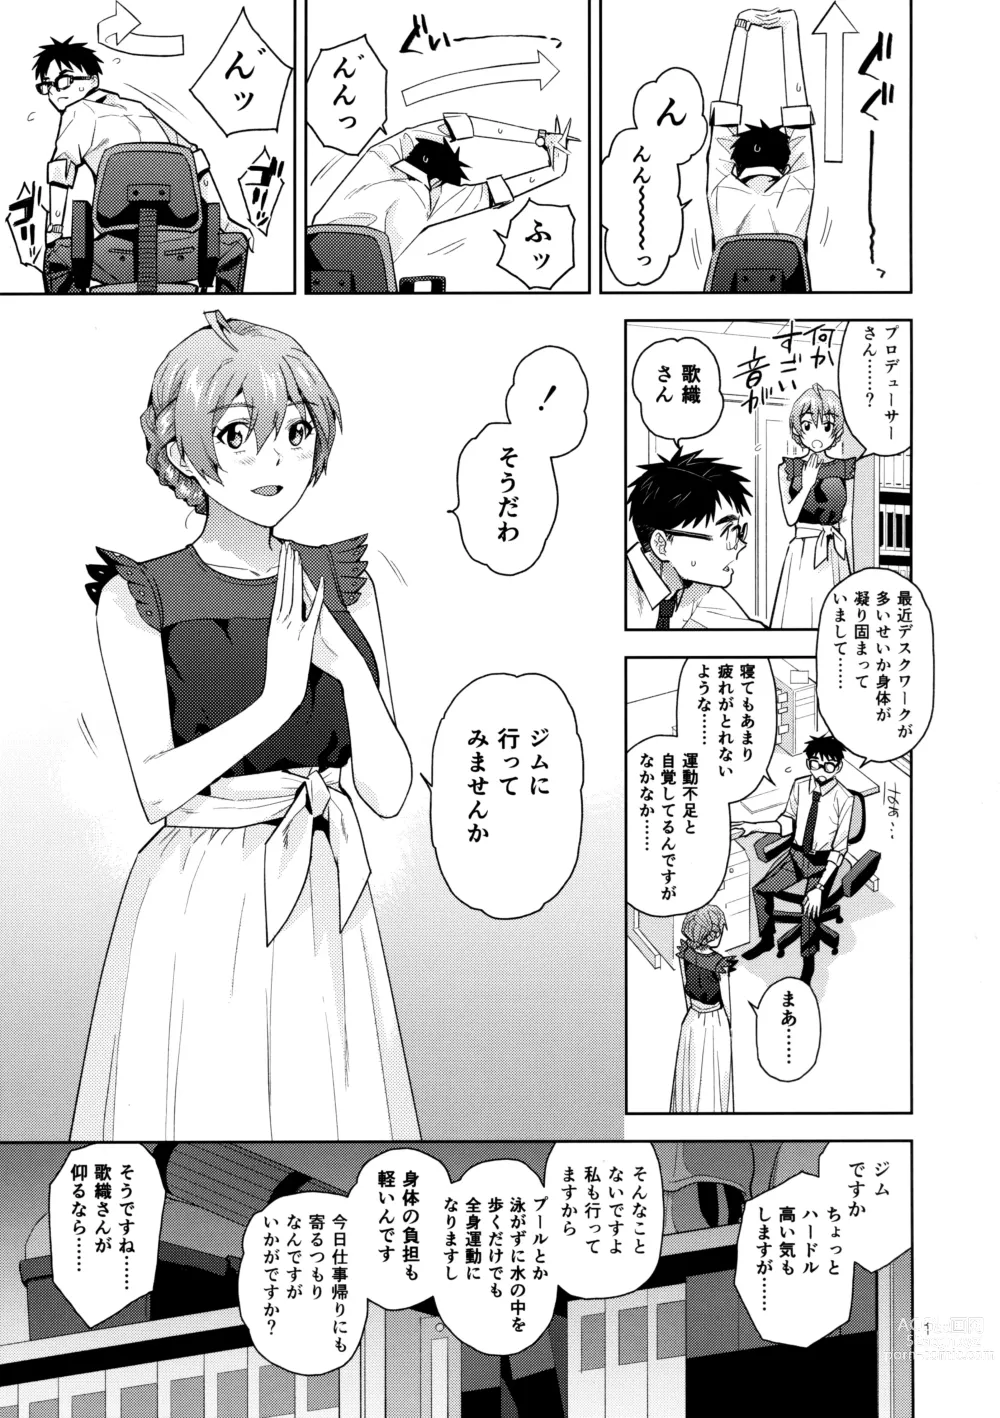 Page 3 of doujinshi S.S.S.